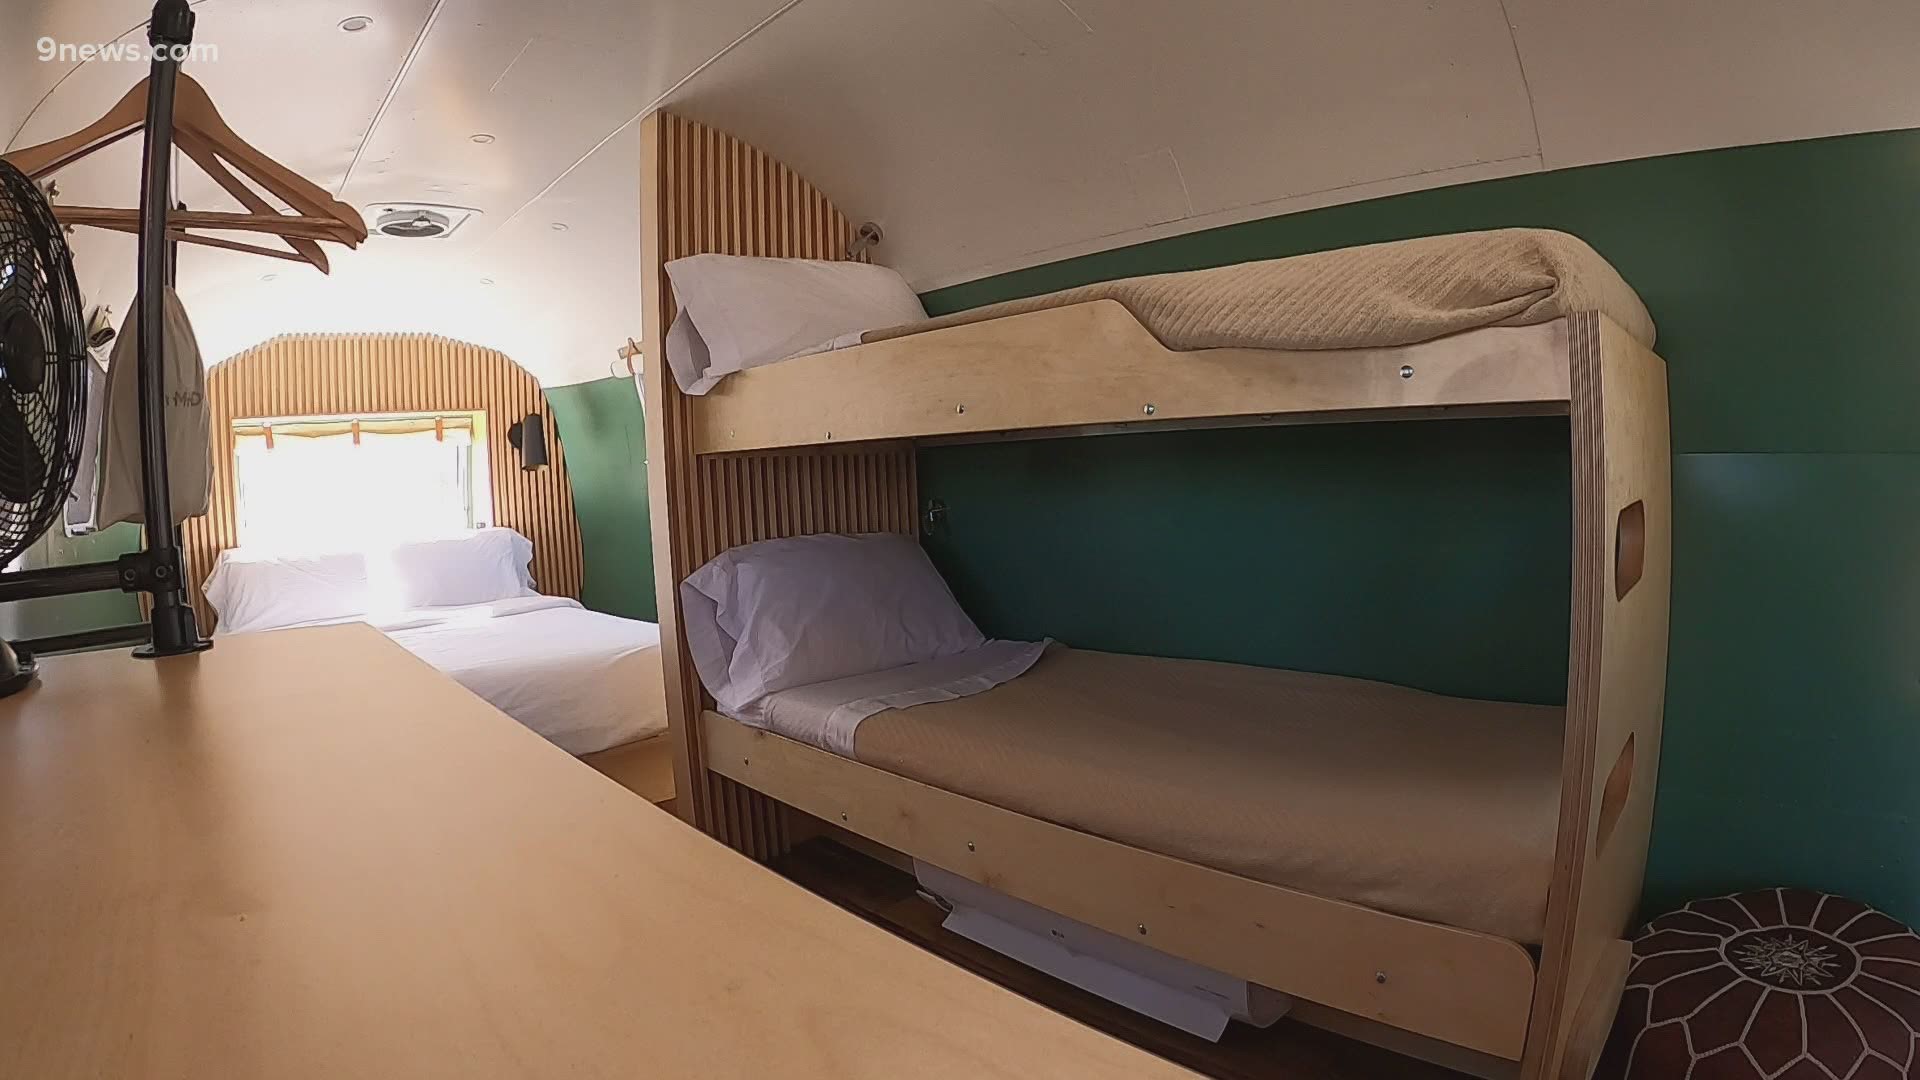 Guests can rent classic silver Airstream trailers at the Amigo Motor Lodge in Salida.